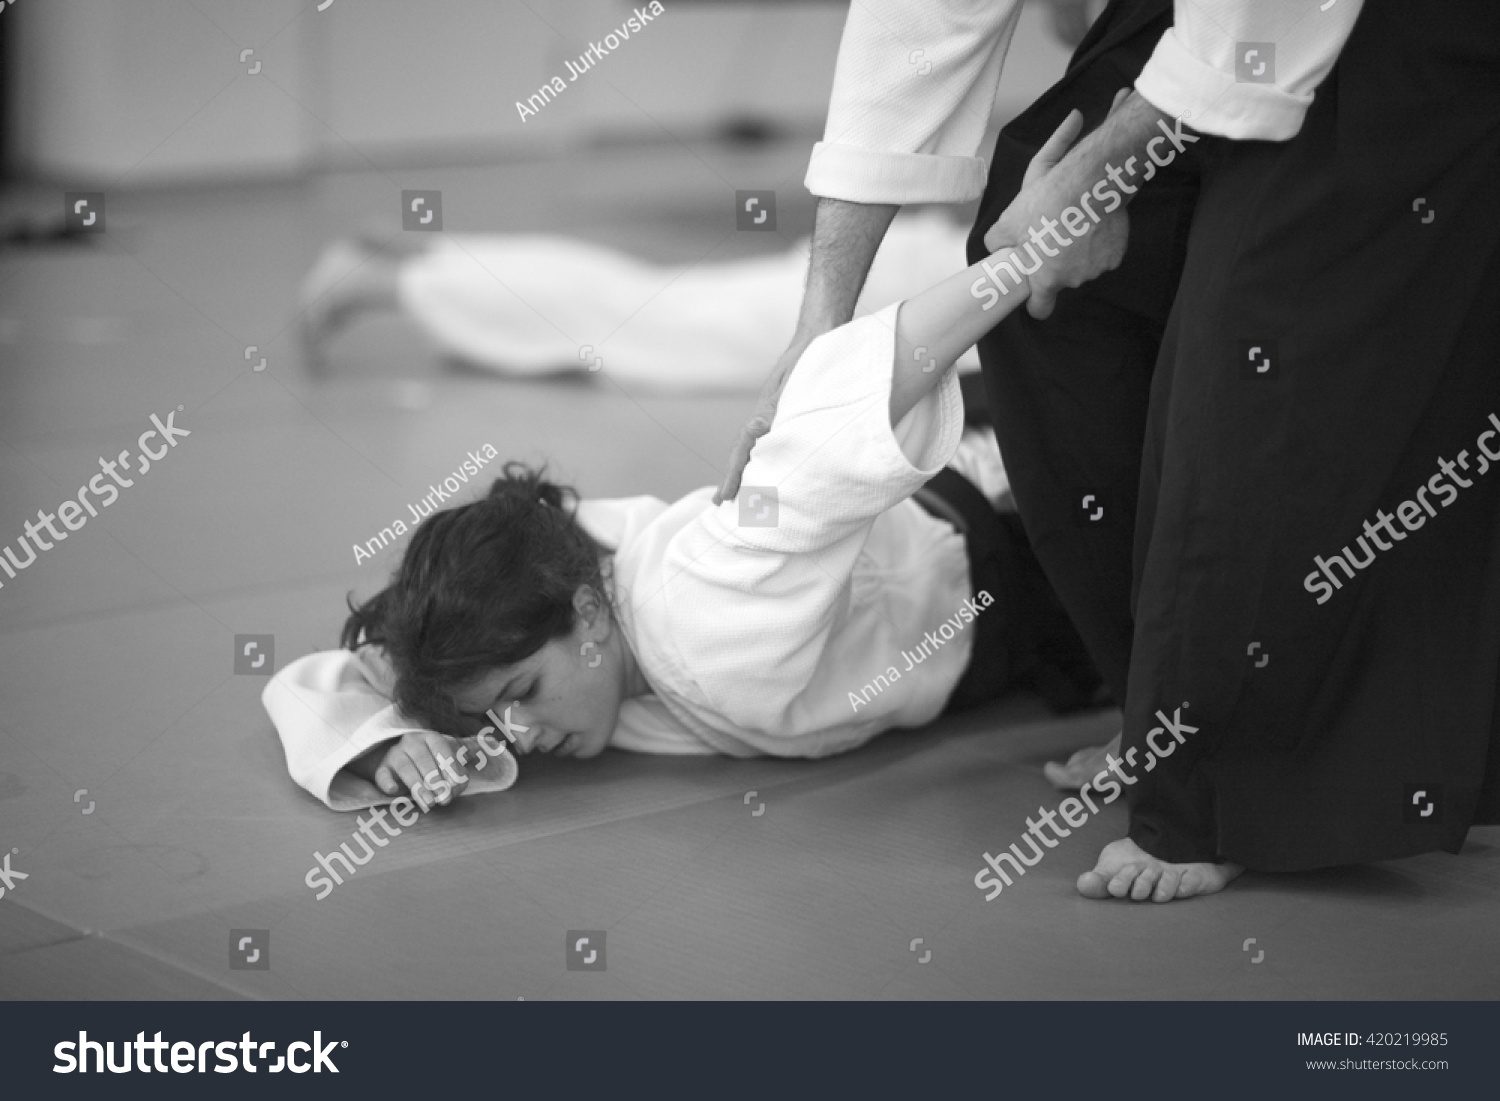 Woman in martial arts; young woman lying on the mat  #420219985